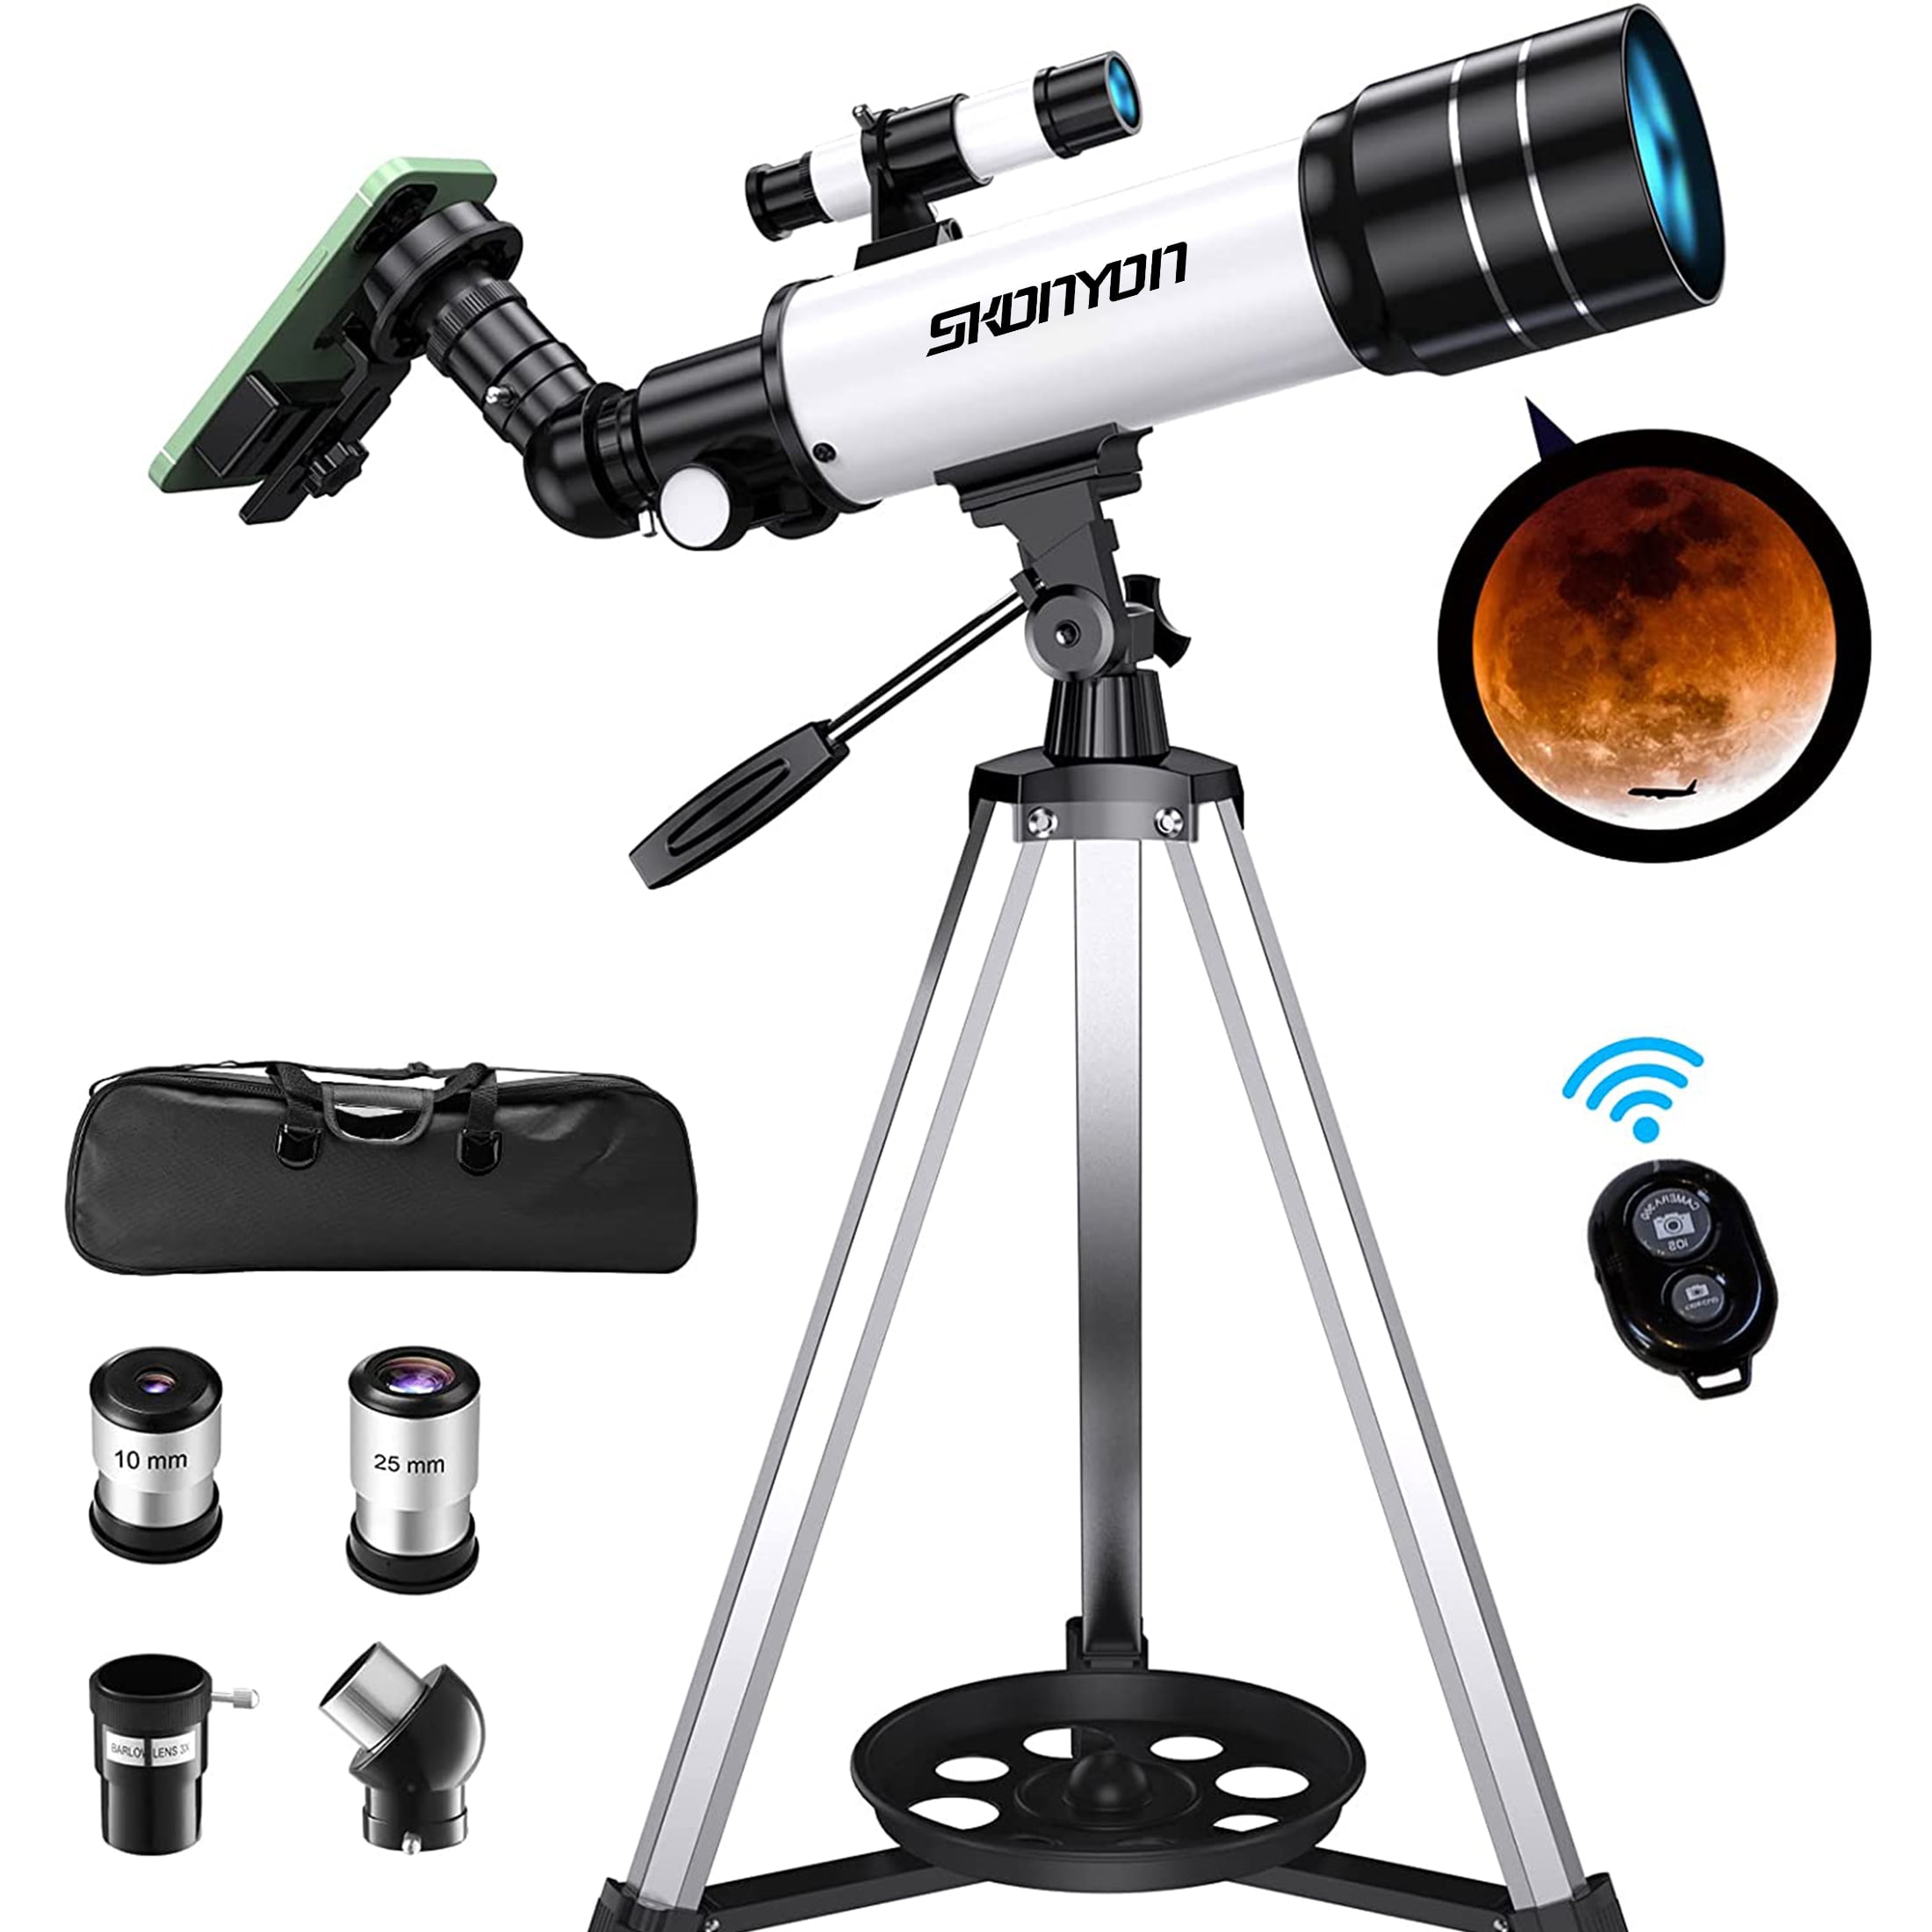 TANGADYL Telescope AZ Astronomical Refractor Telescope with an Tripod and 2 Eyepieces Astronomical Telescope for Kids Adults Beginners for Astrophotography and Visual Astronomy 